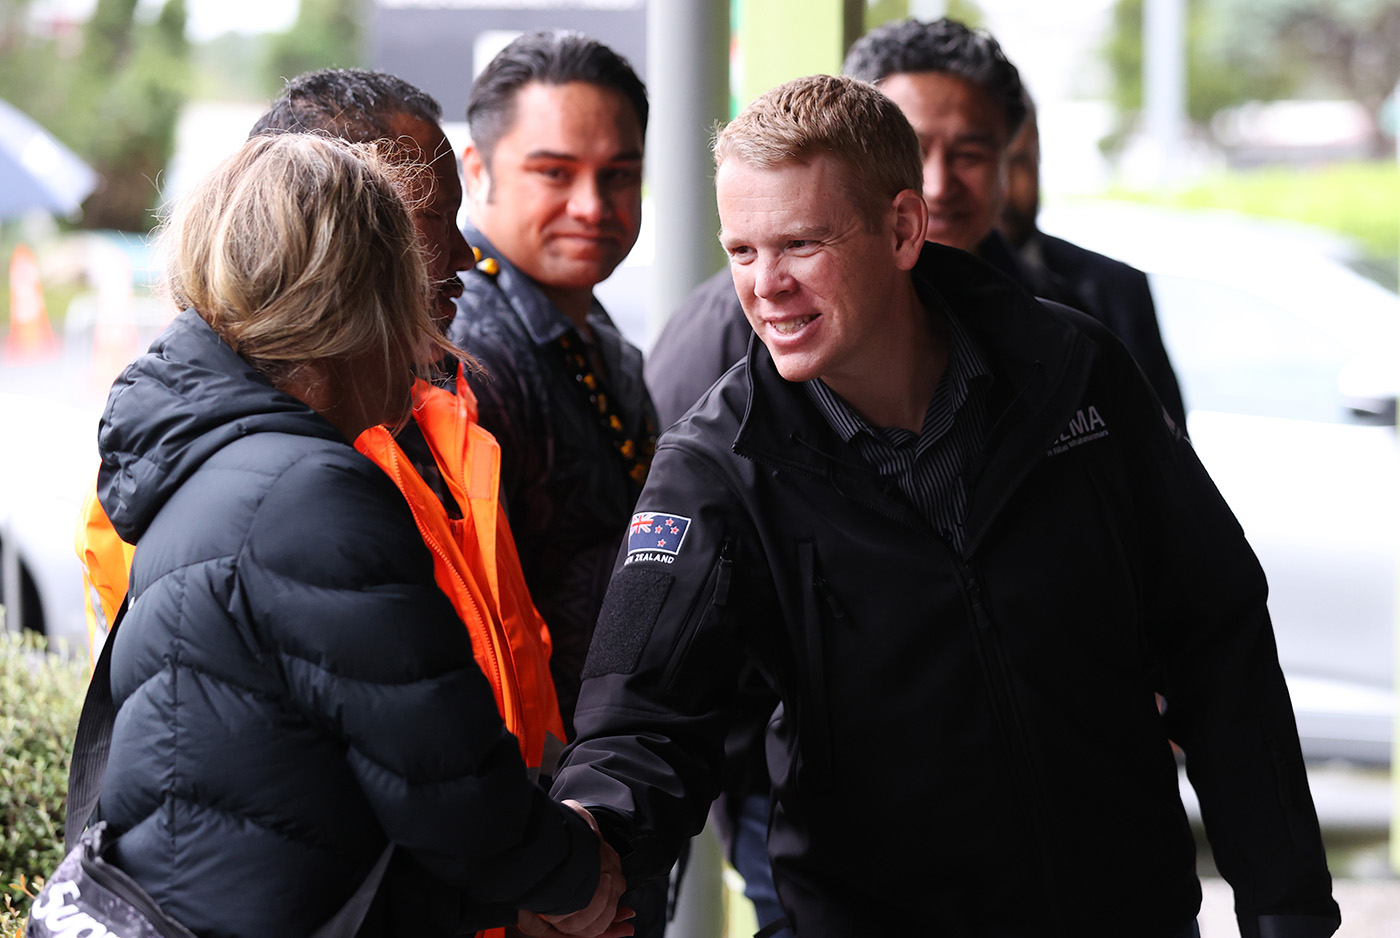 Prime Minister Chris Hipkins meeting with members of the community at a Civil Defence Centre